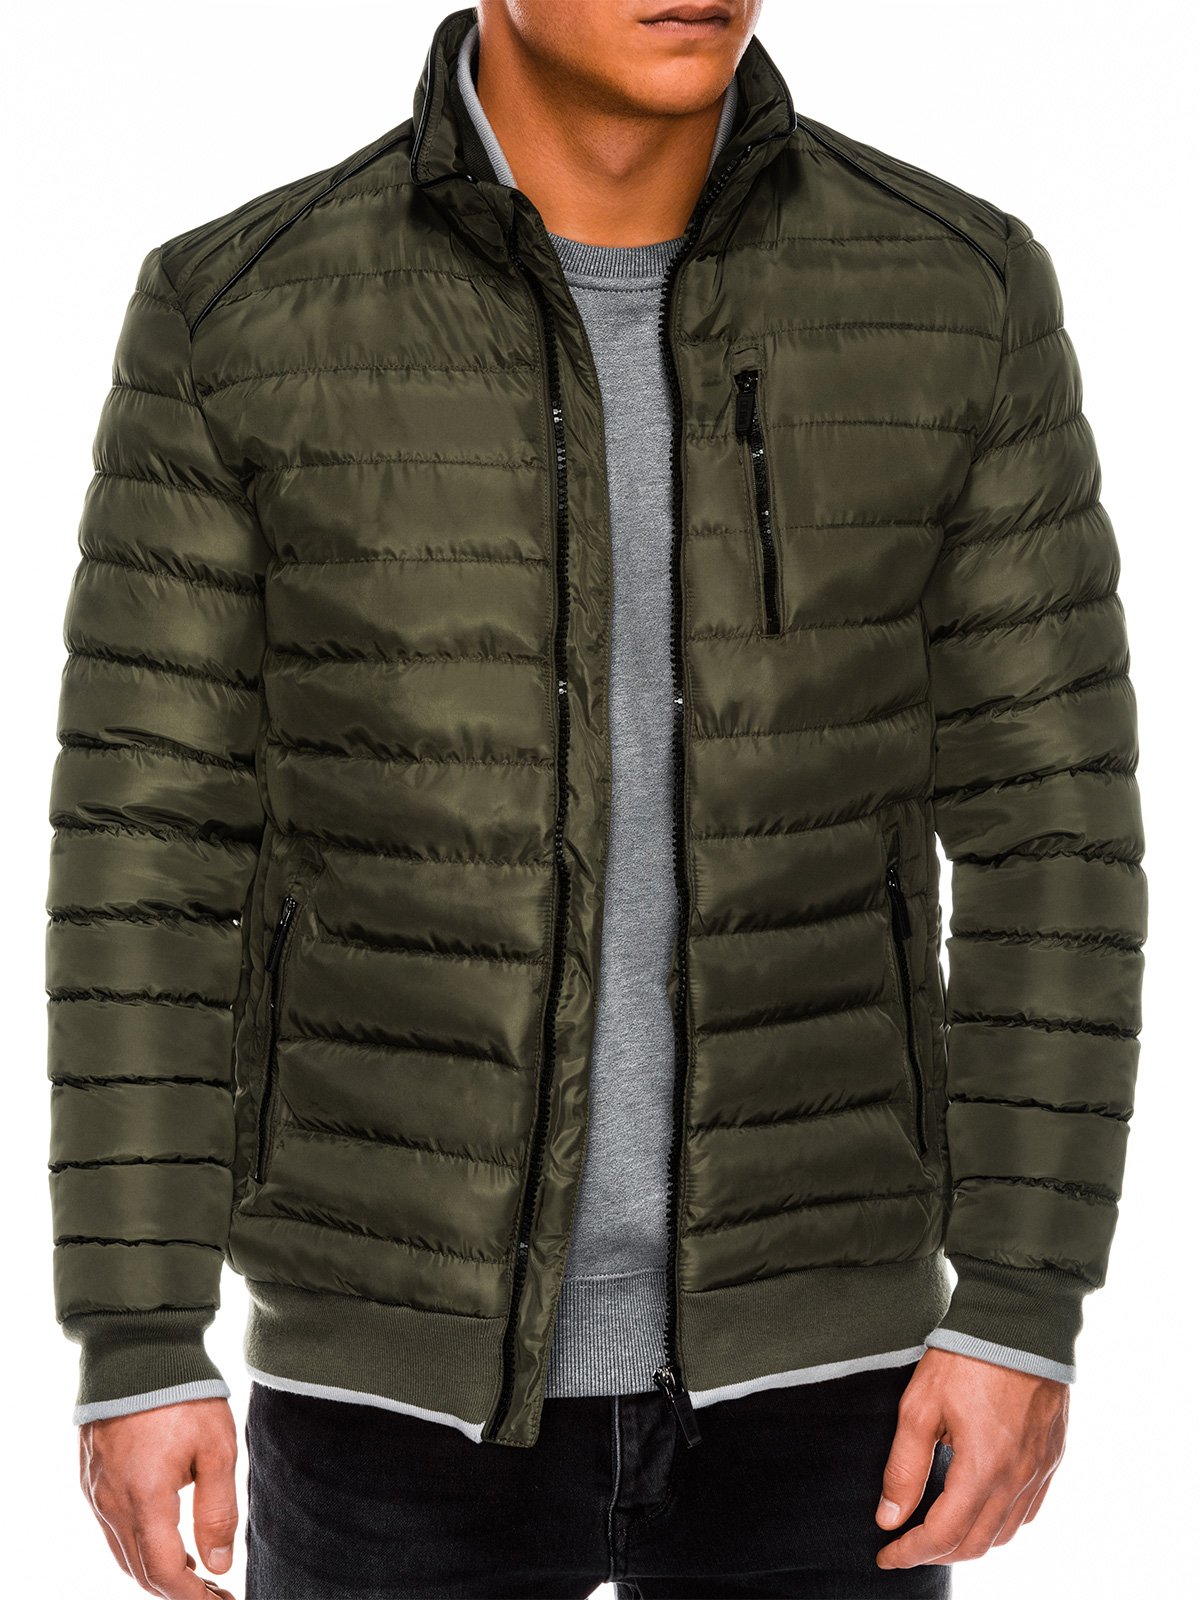 Men's winter quilted jacket C422 - green | MODONE wholesale - Clothing ...